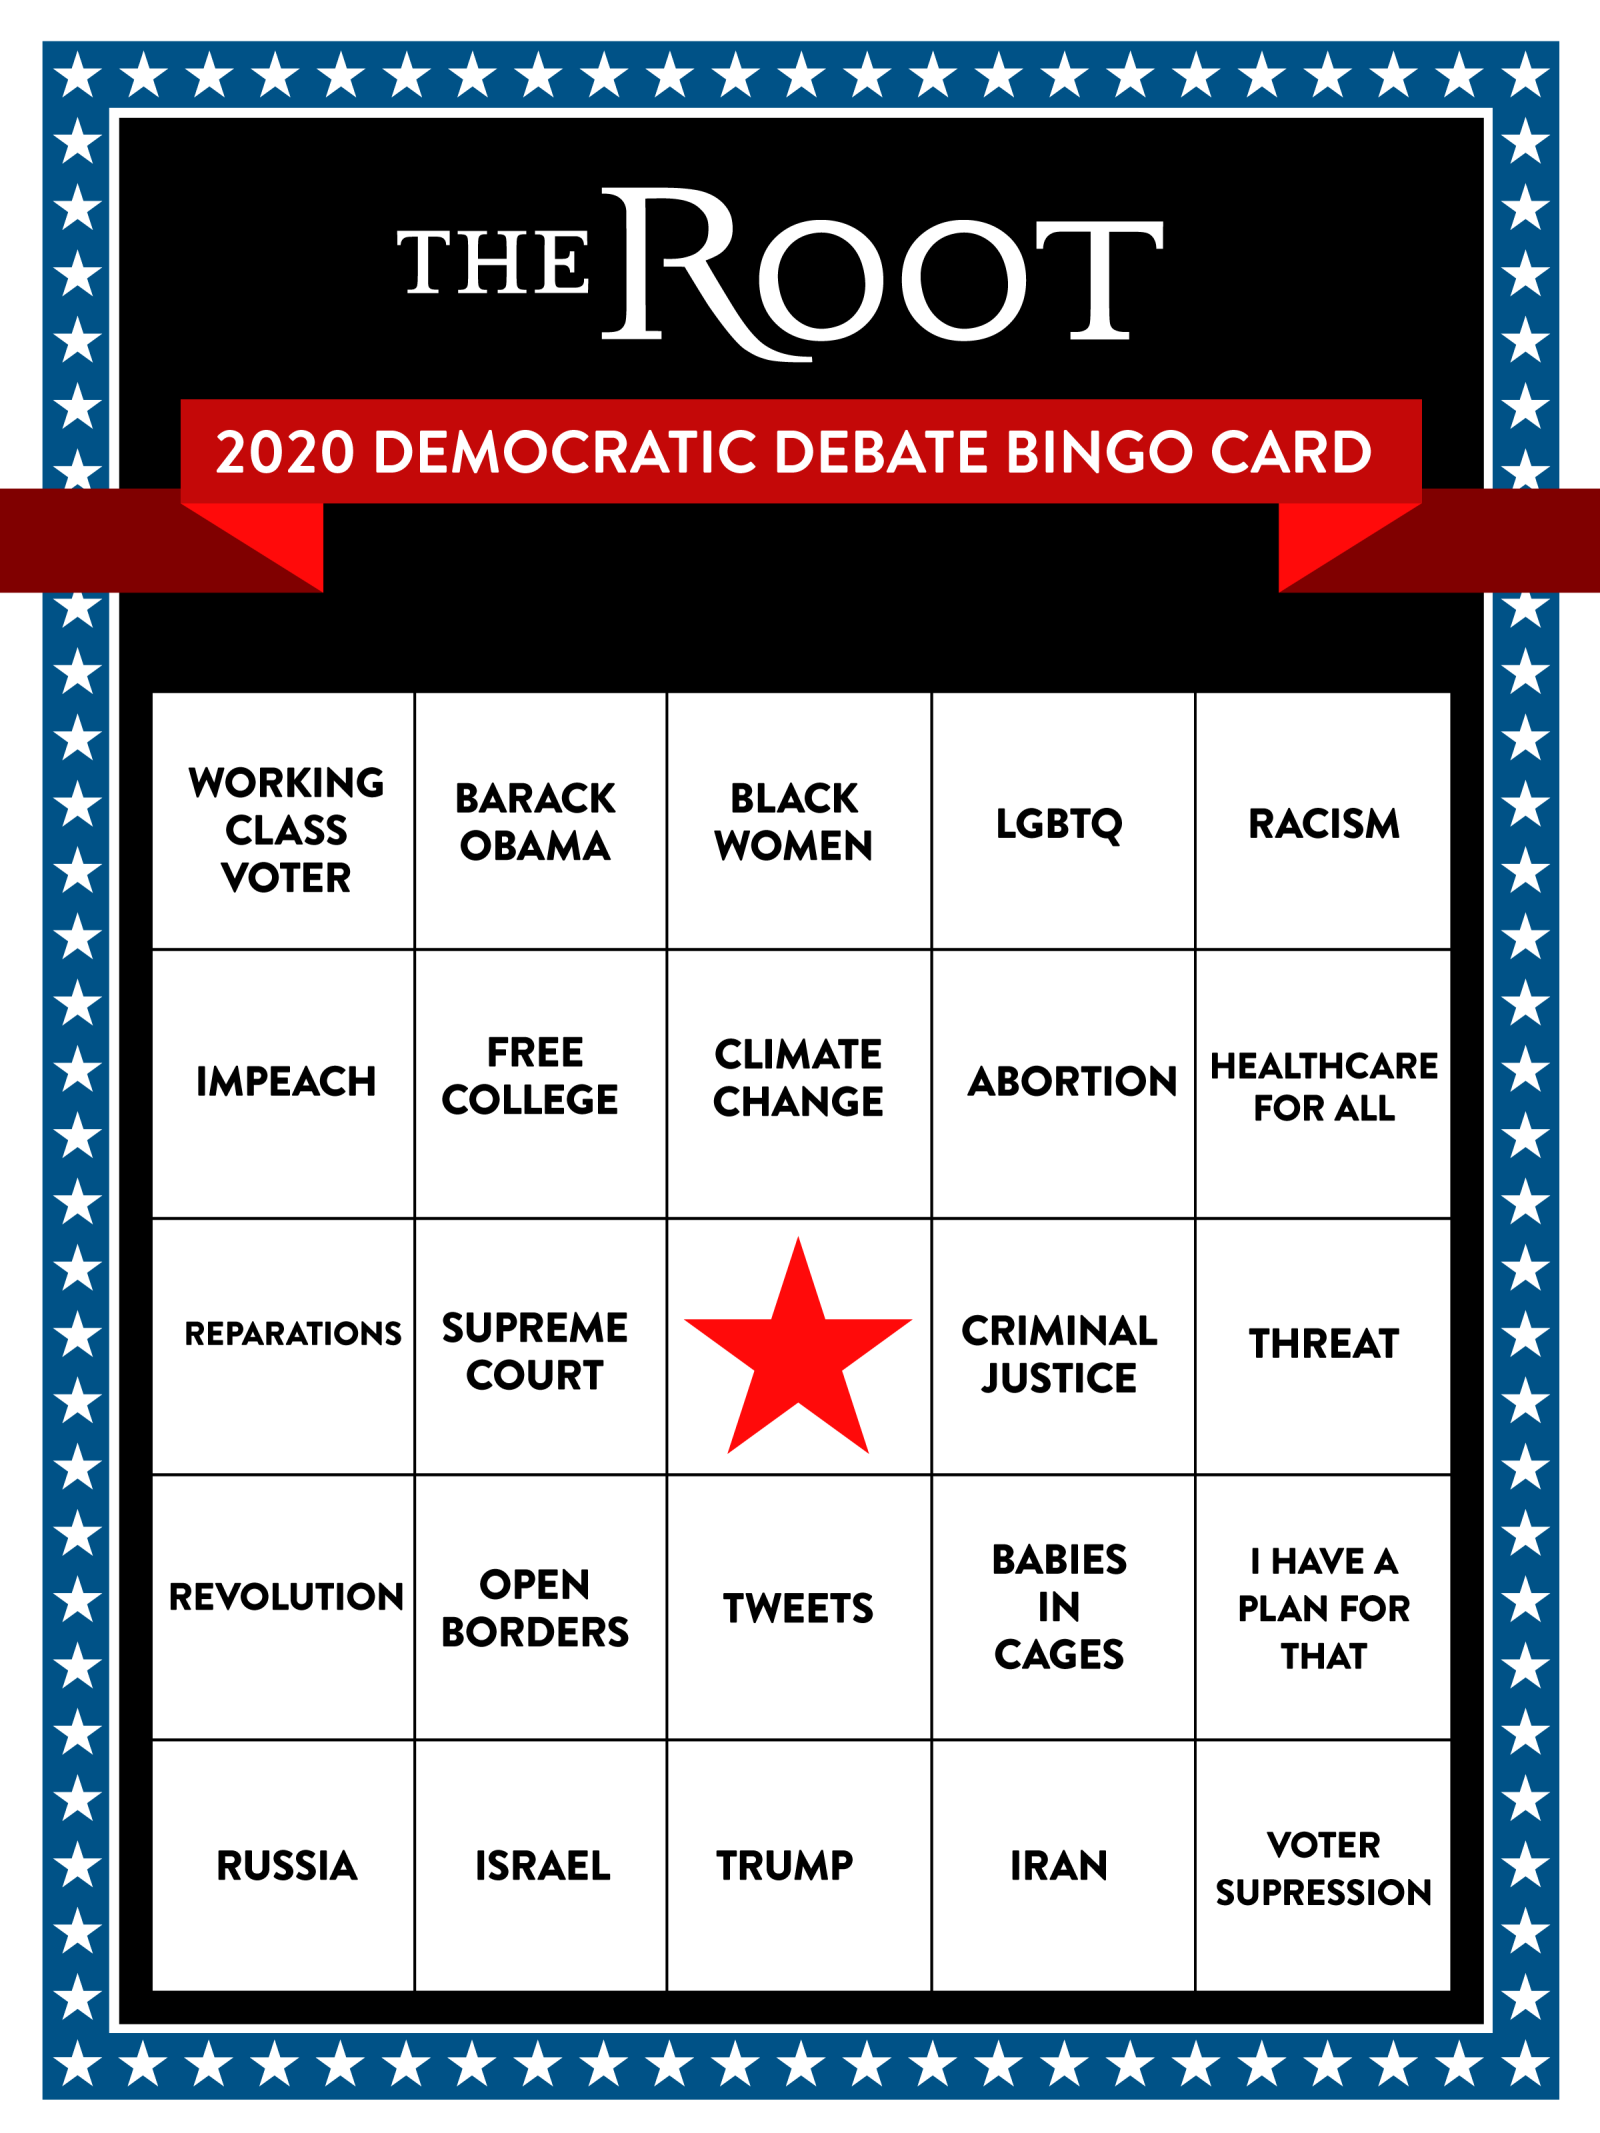 Among the items on the
debate bingo card are Barack Obama, Racism, Abortion, Healthcare for All, Tweets, I Have a Plan for That, Iran,
Voter Suppression, Trump, Black Women, Reparations, and Free College